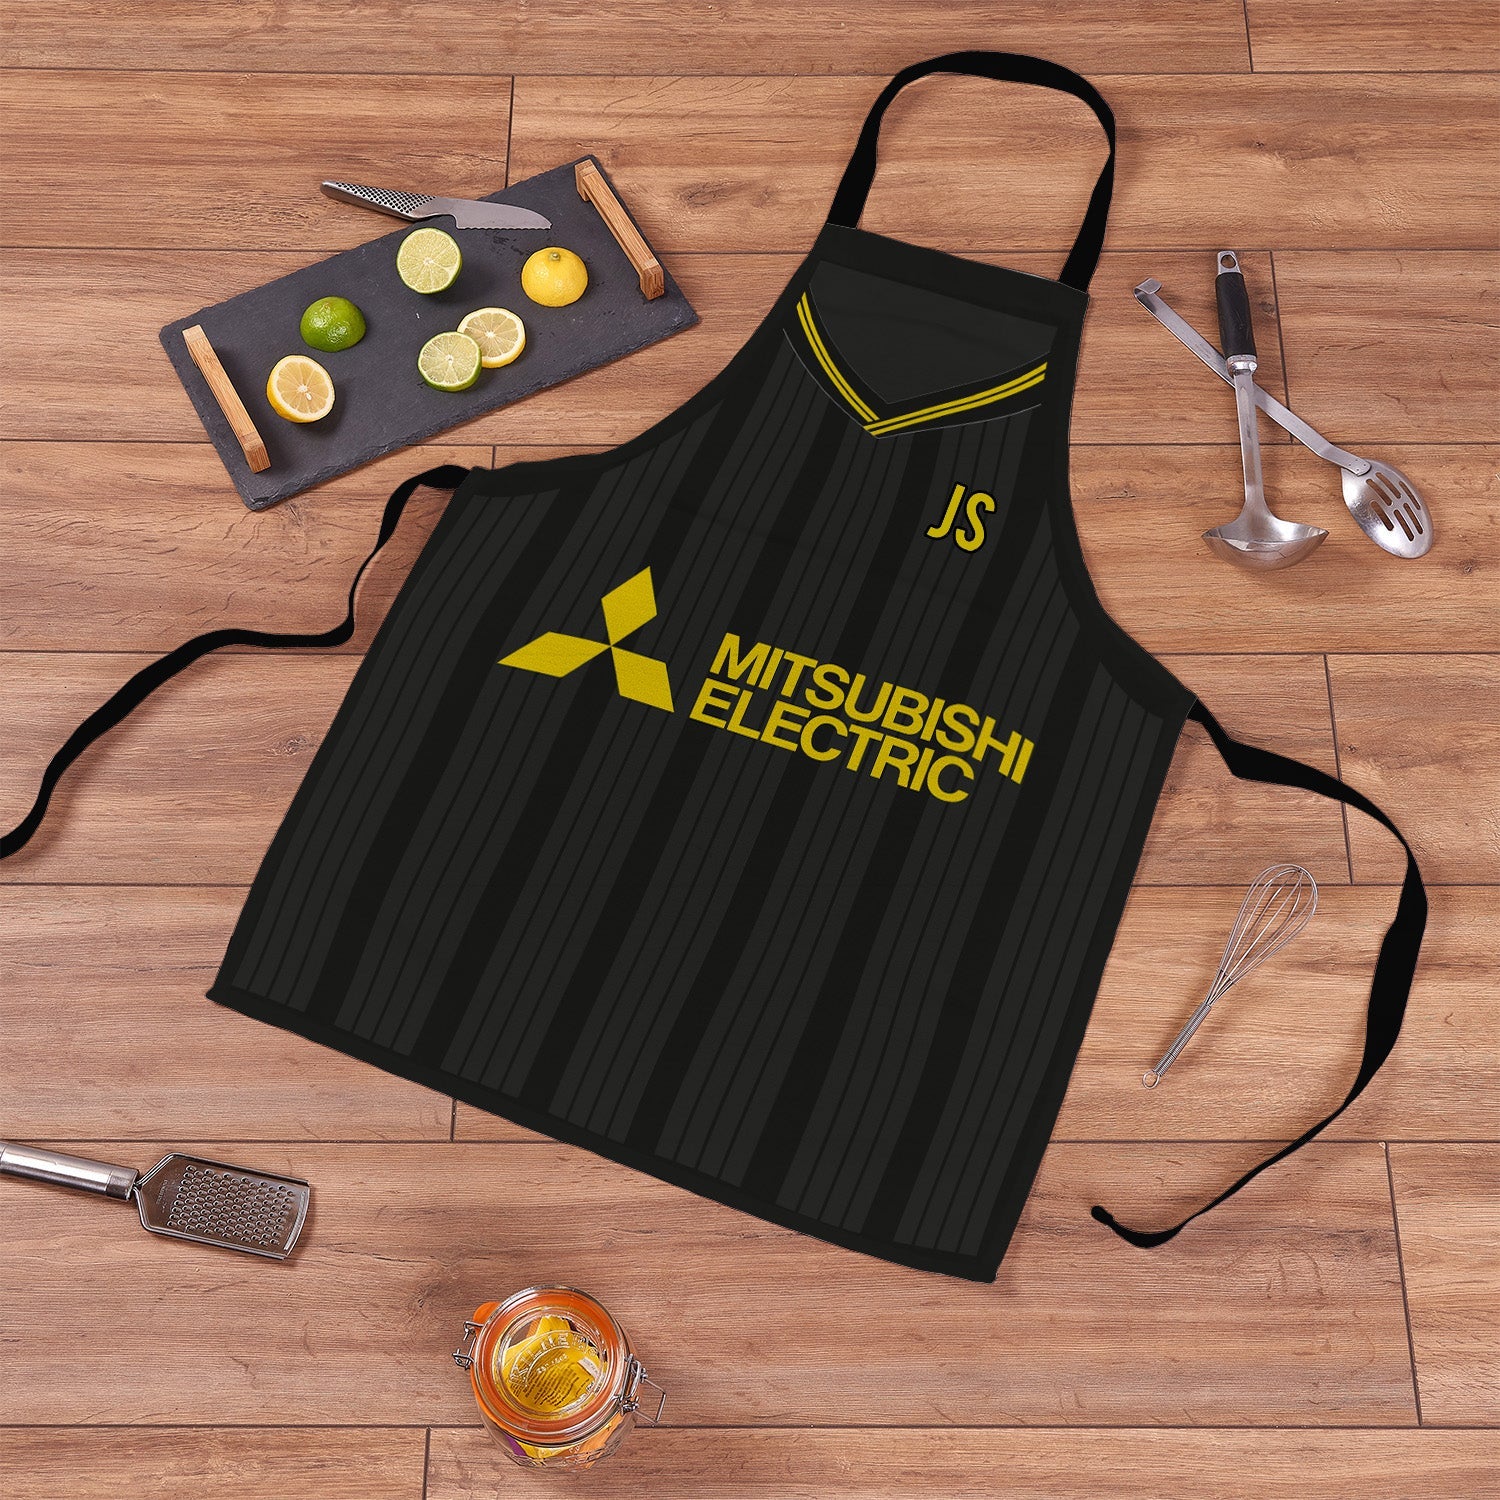 Livingston 1995 Home Shirt Apron - Personalised Retro Football Novelty Water-Resistant, Lazer Cut (no fraying) Light Weight Adults Apron